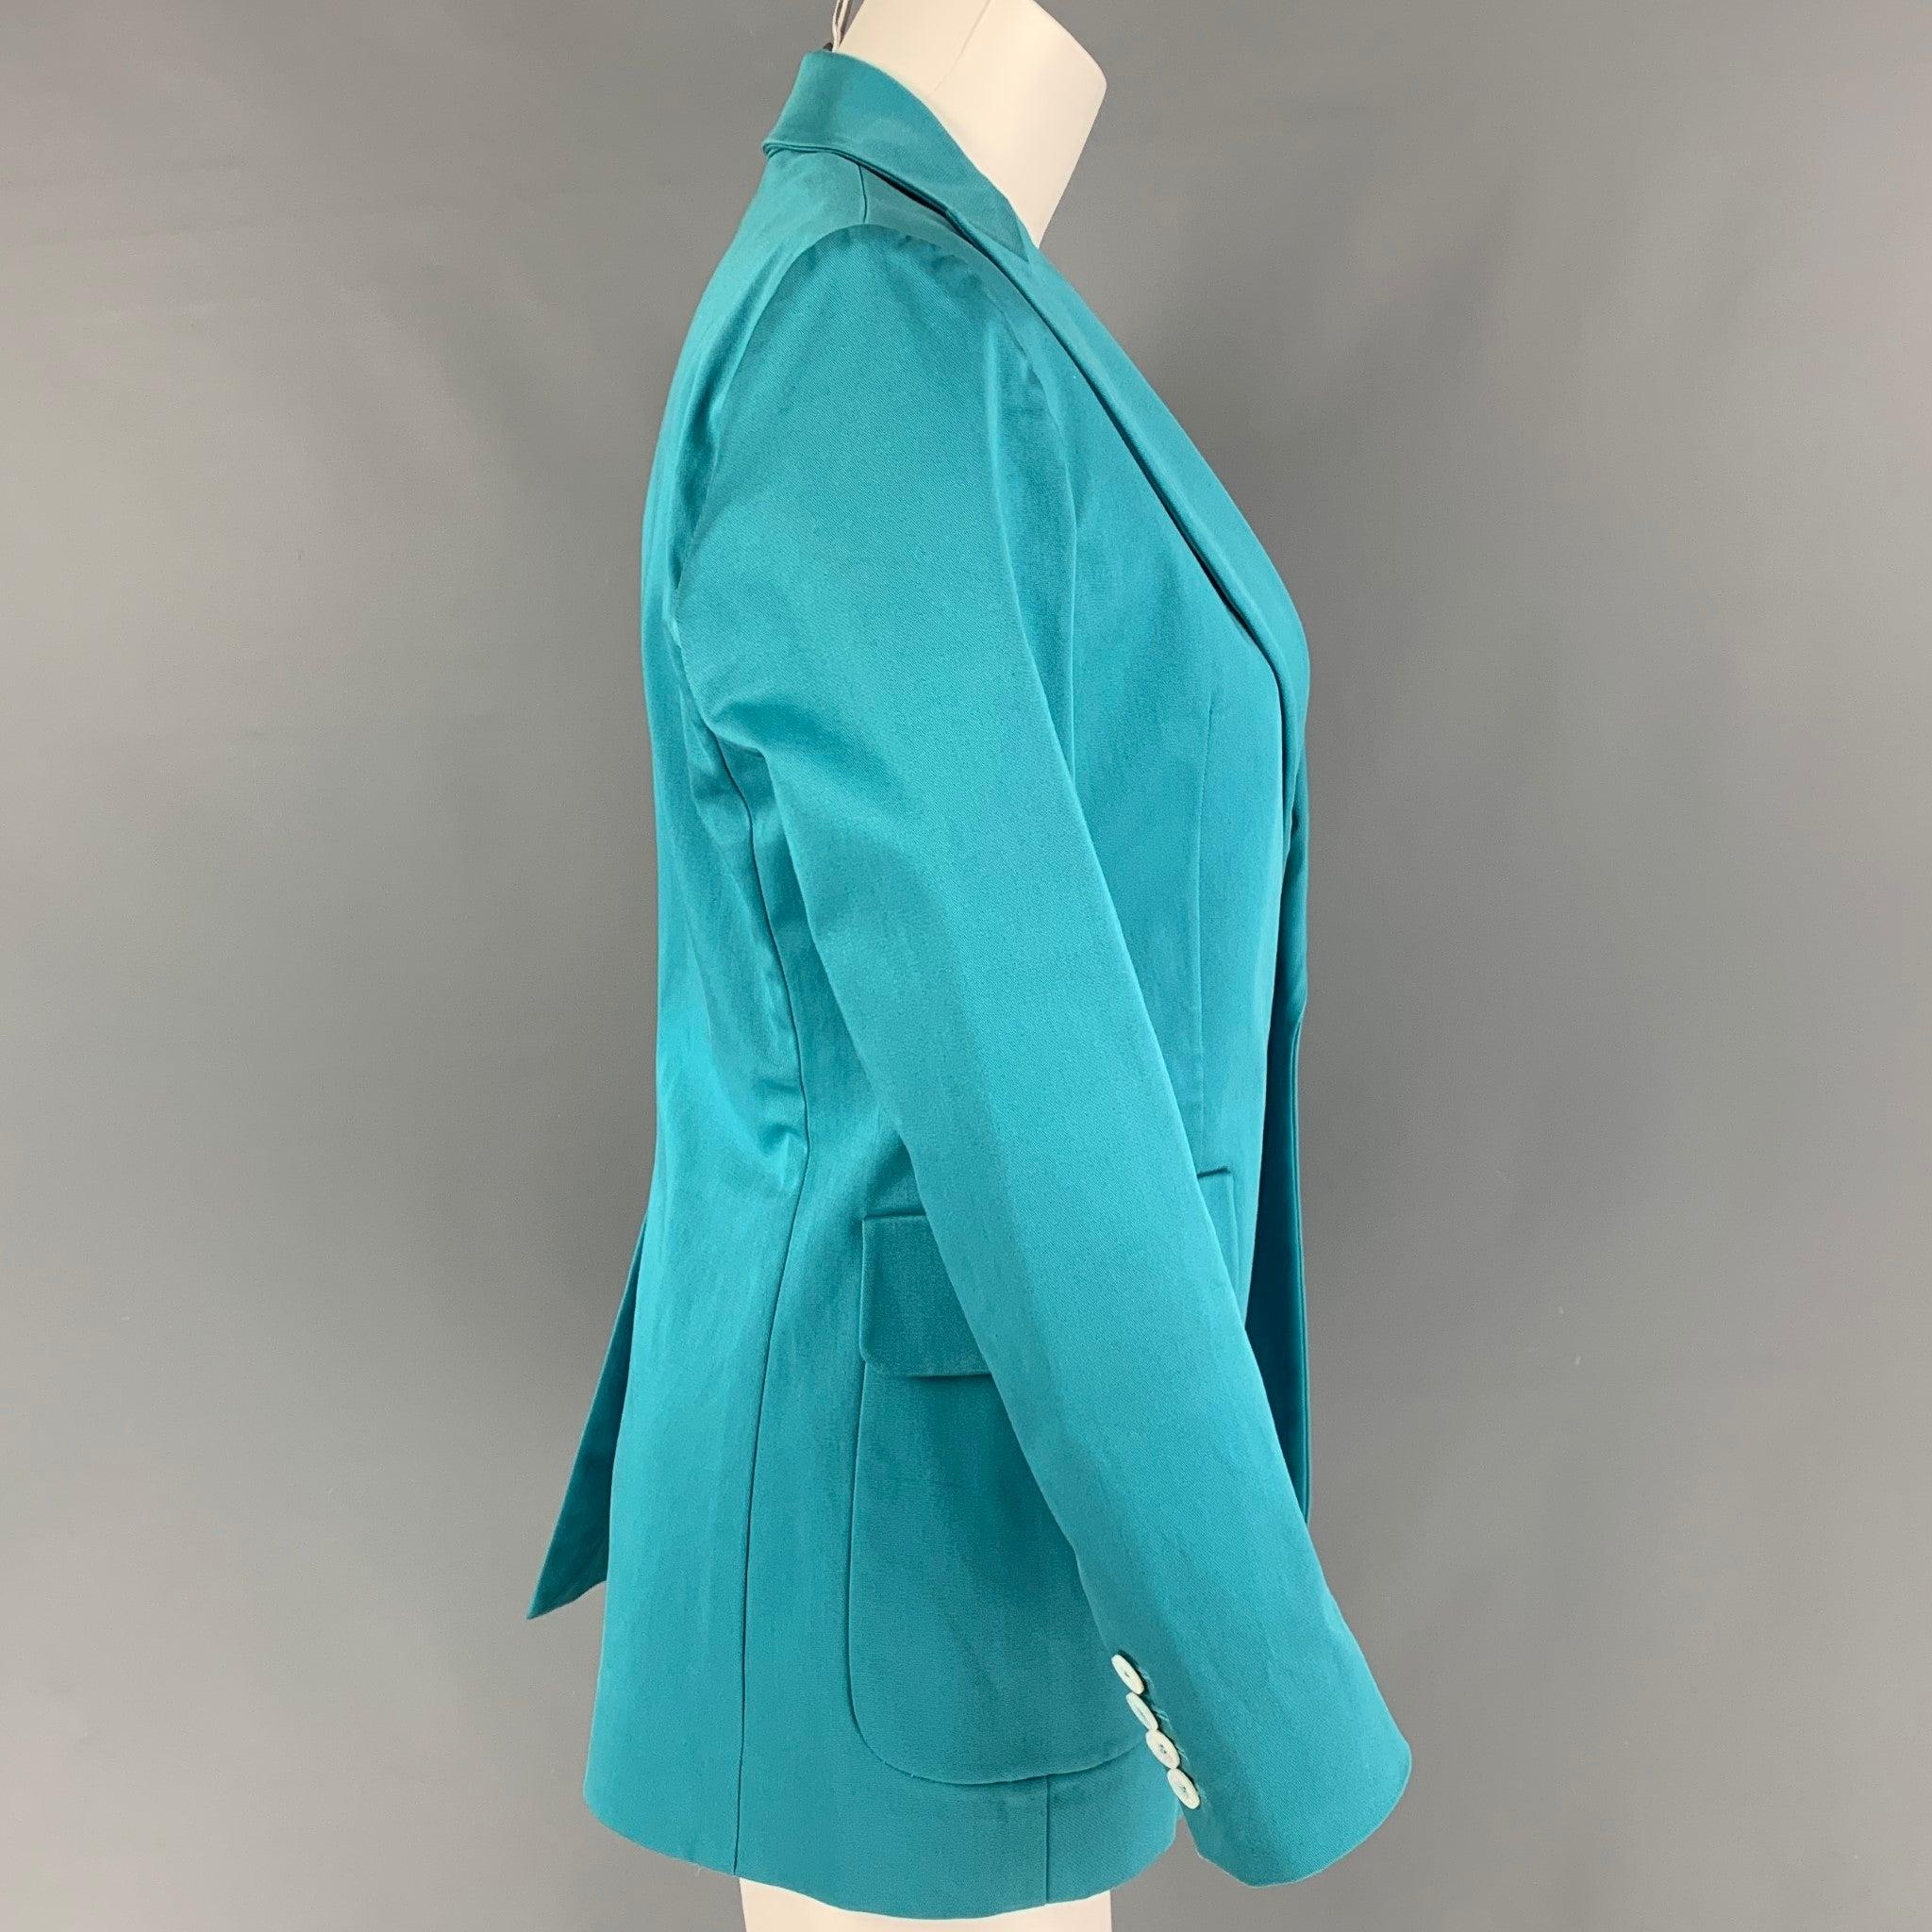 DSQUARED2 blazer comes in a teal cotton featuring a peak lapel, patch pockets, single back vent, and a single button closure. Made in Italy.
Very Good
Pre-Owned Condition. 

Marked:   44 

Measurements: 
 
Shoulder: 15.5 inches  Bust: 36 inches 